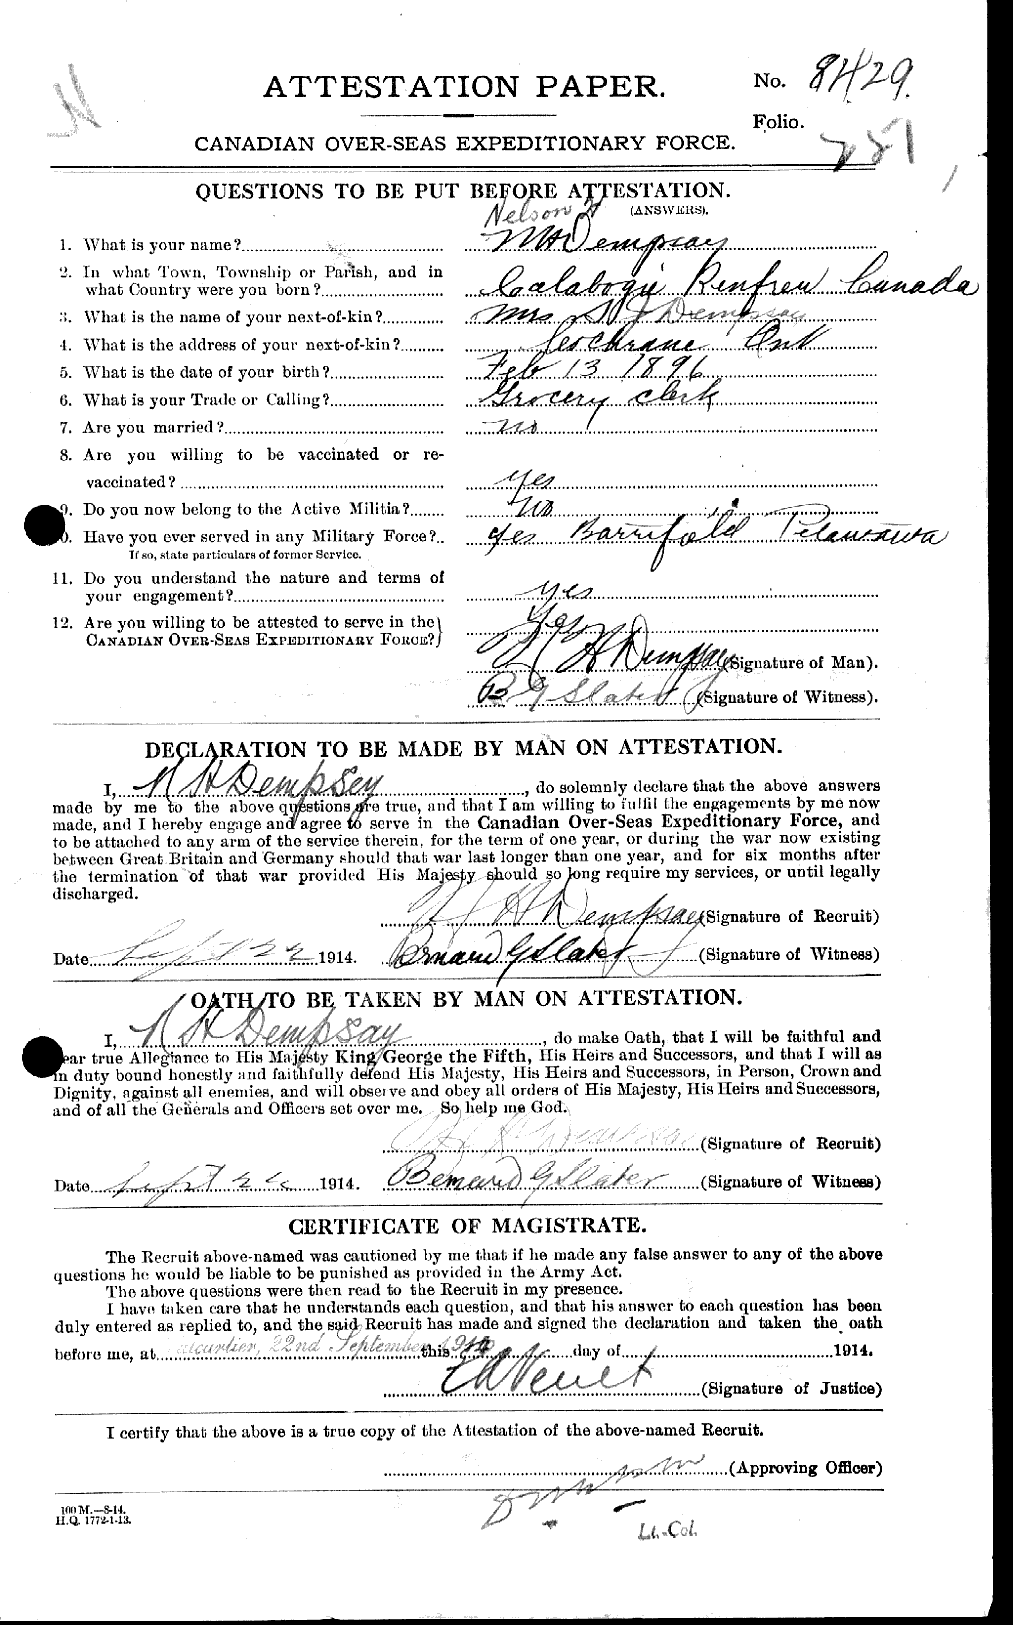 Personnel Records of the First World War - CEF 051285a